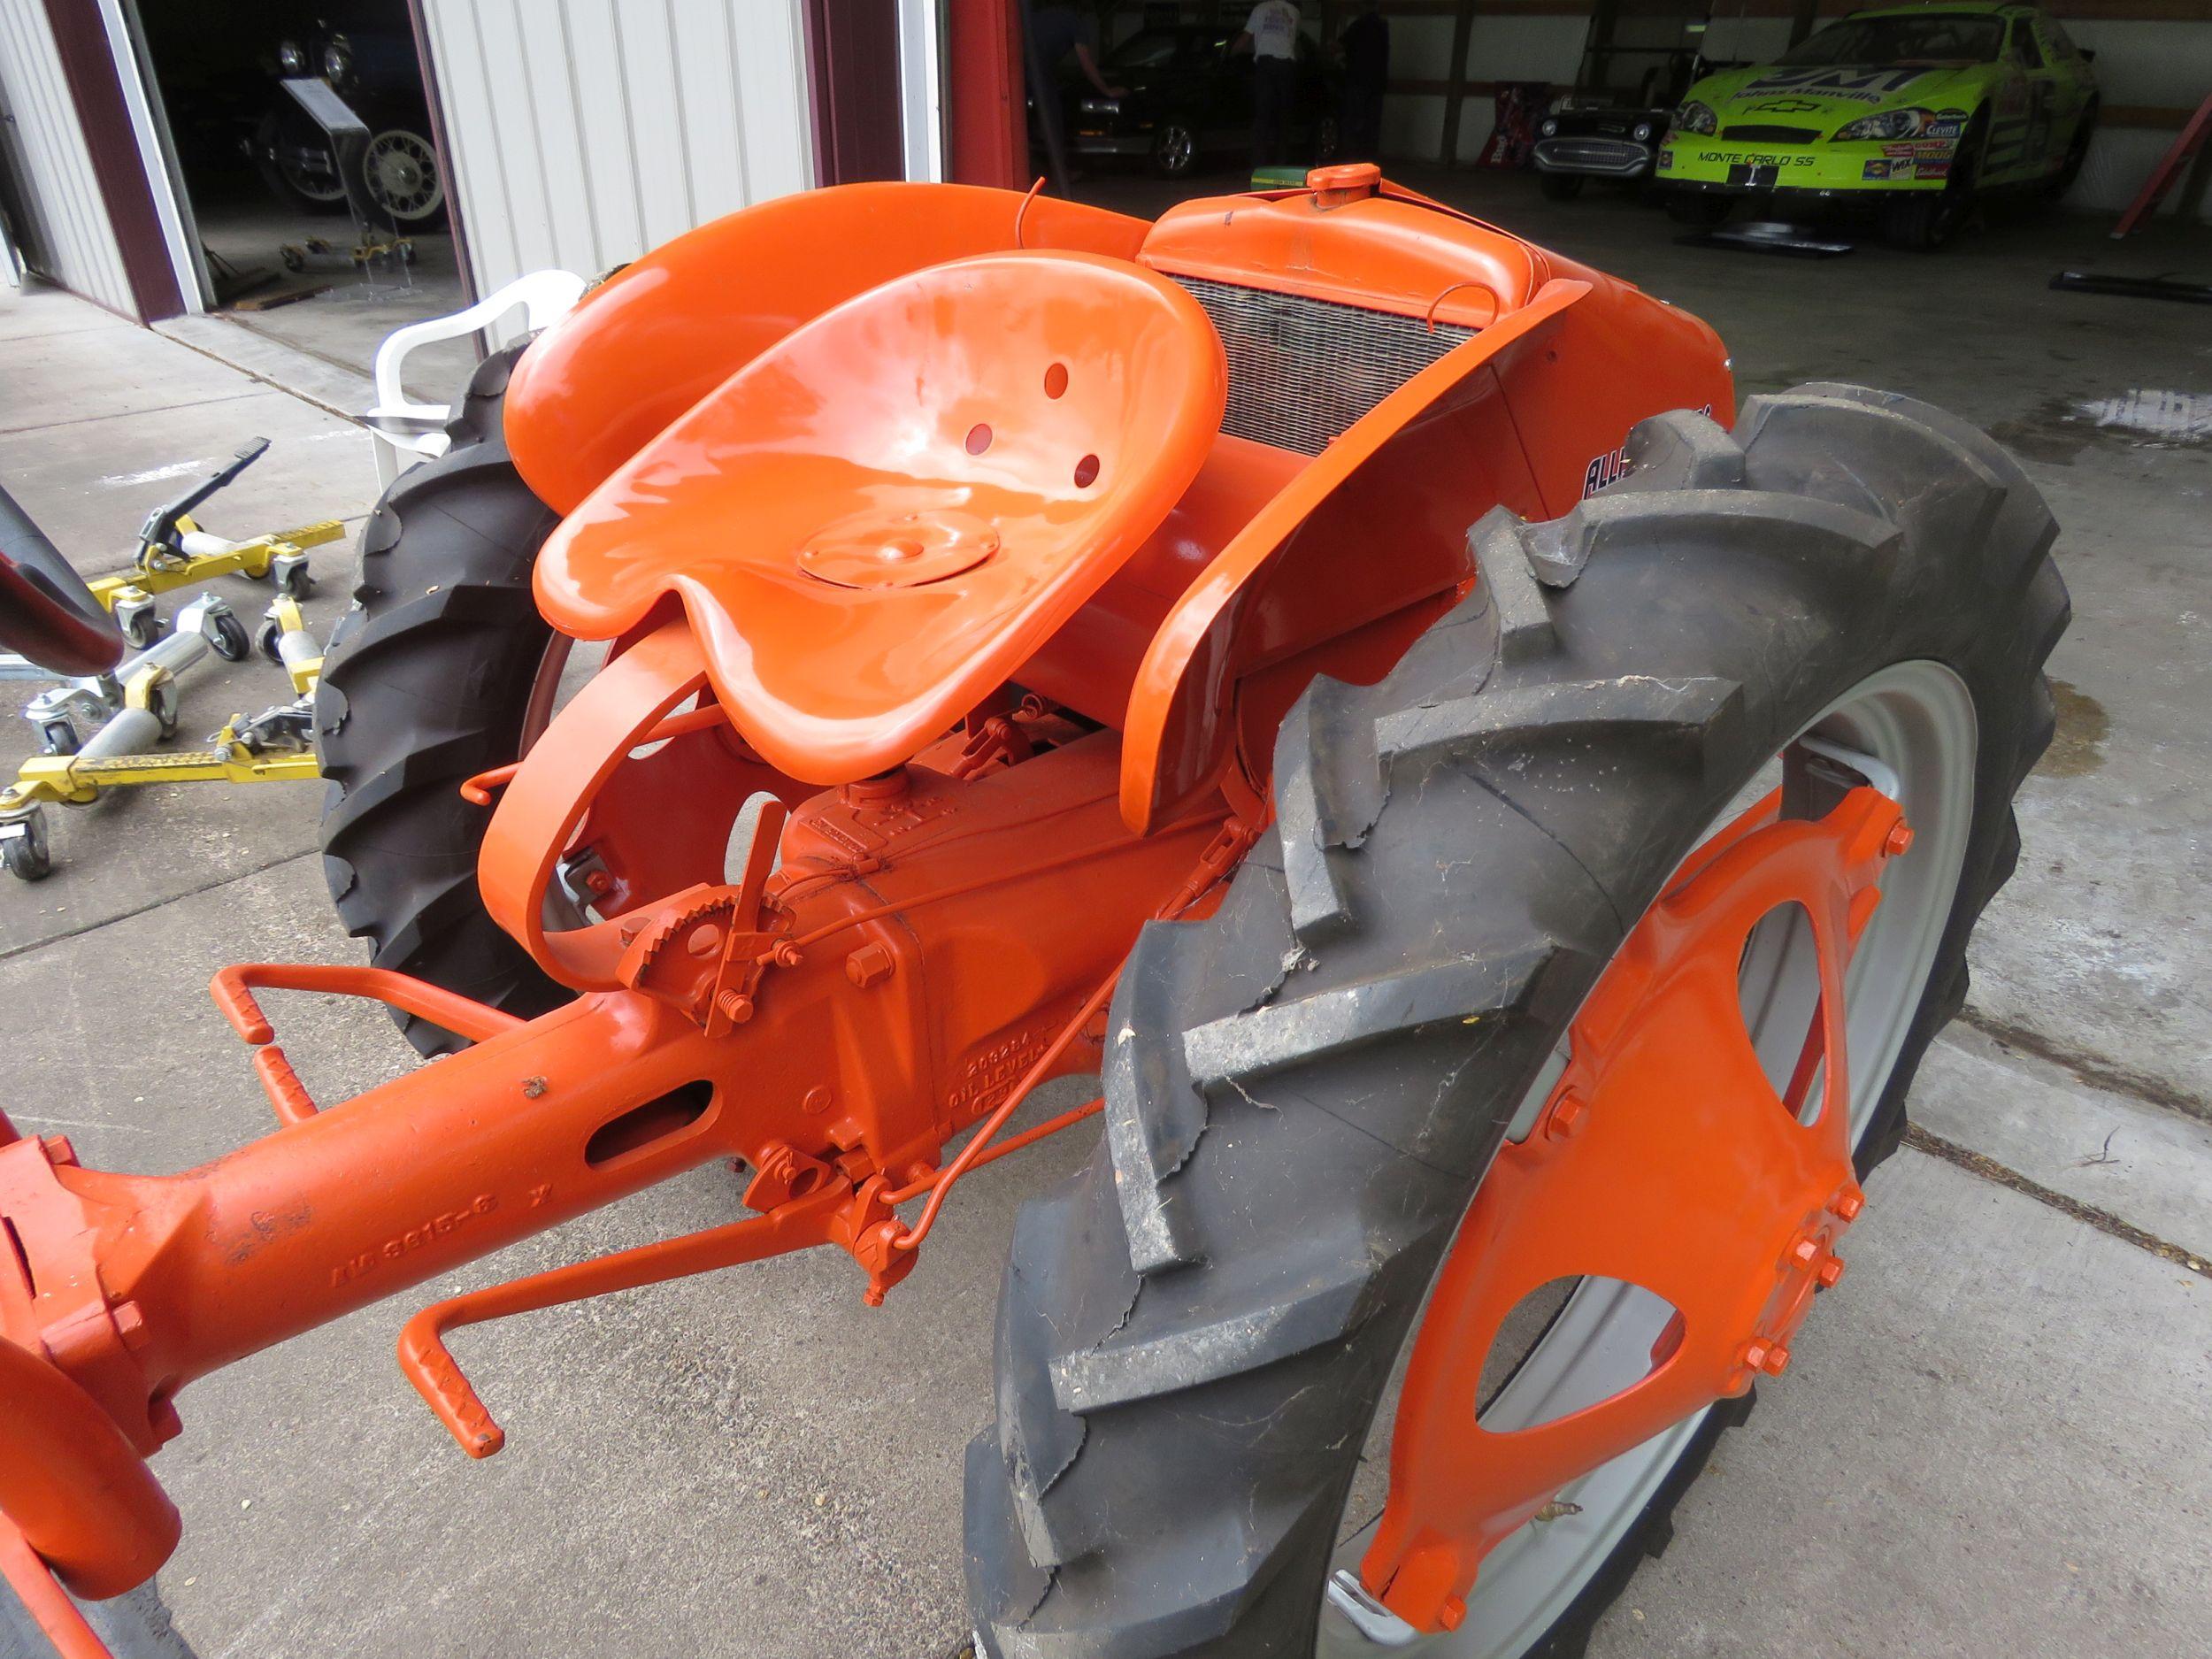 1949 G Allis Chalmers Tractor